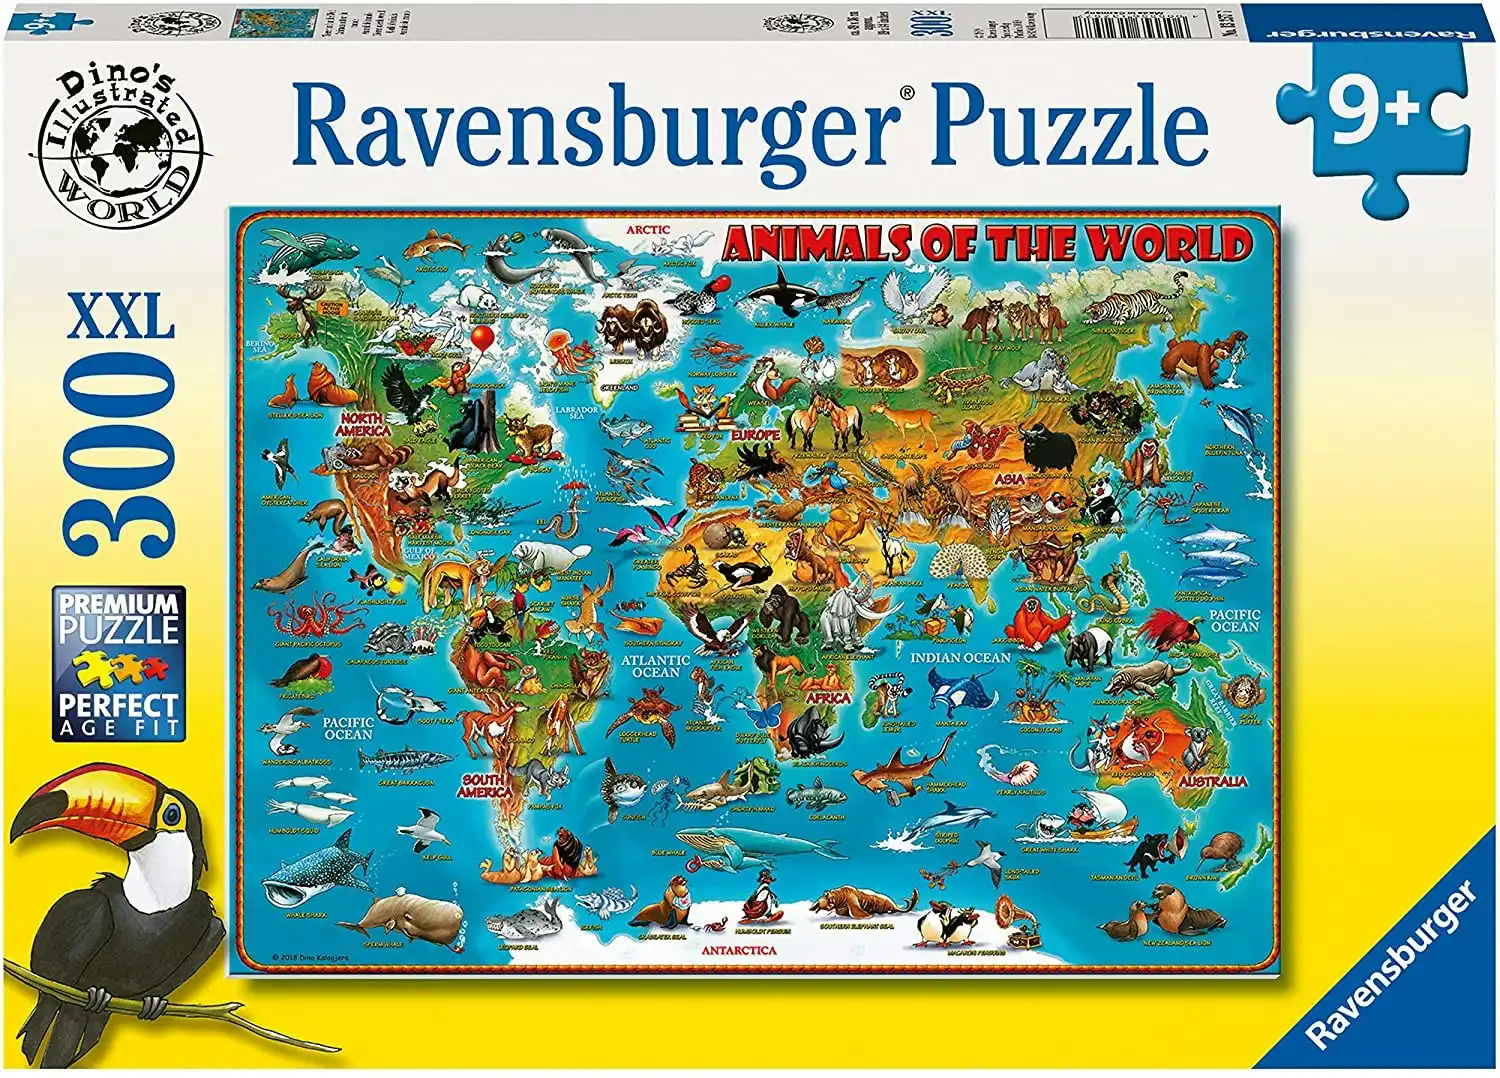 Ravensburger - Animals Of The World Jigsaw Puzzle 300 Pieces